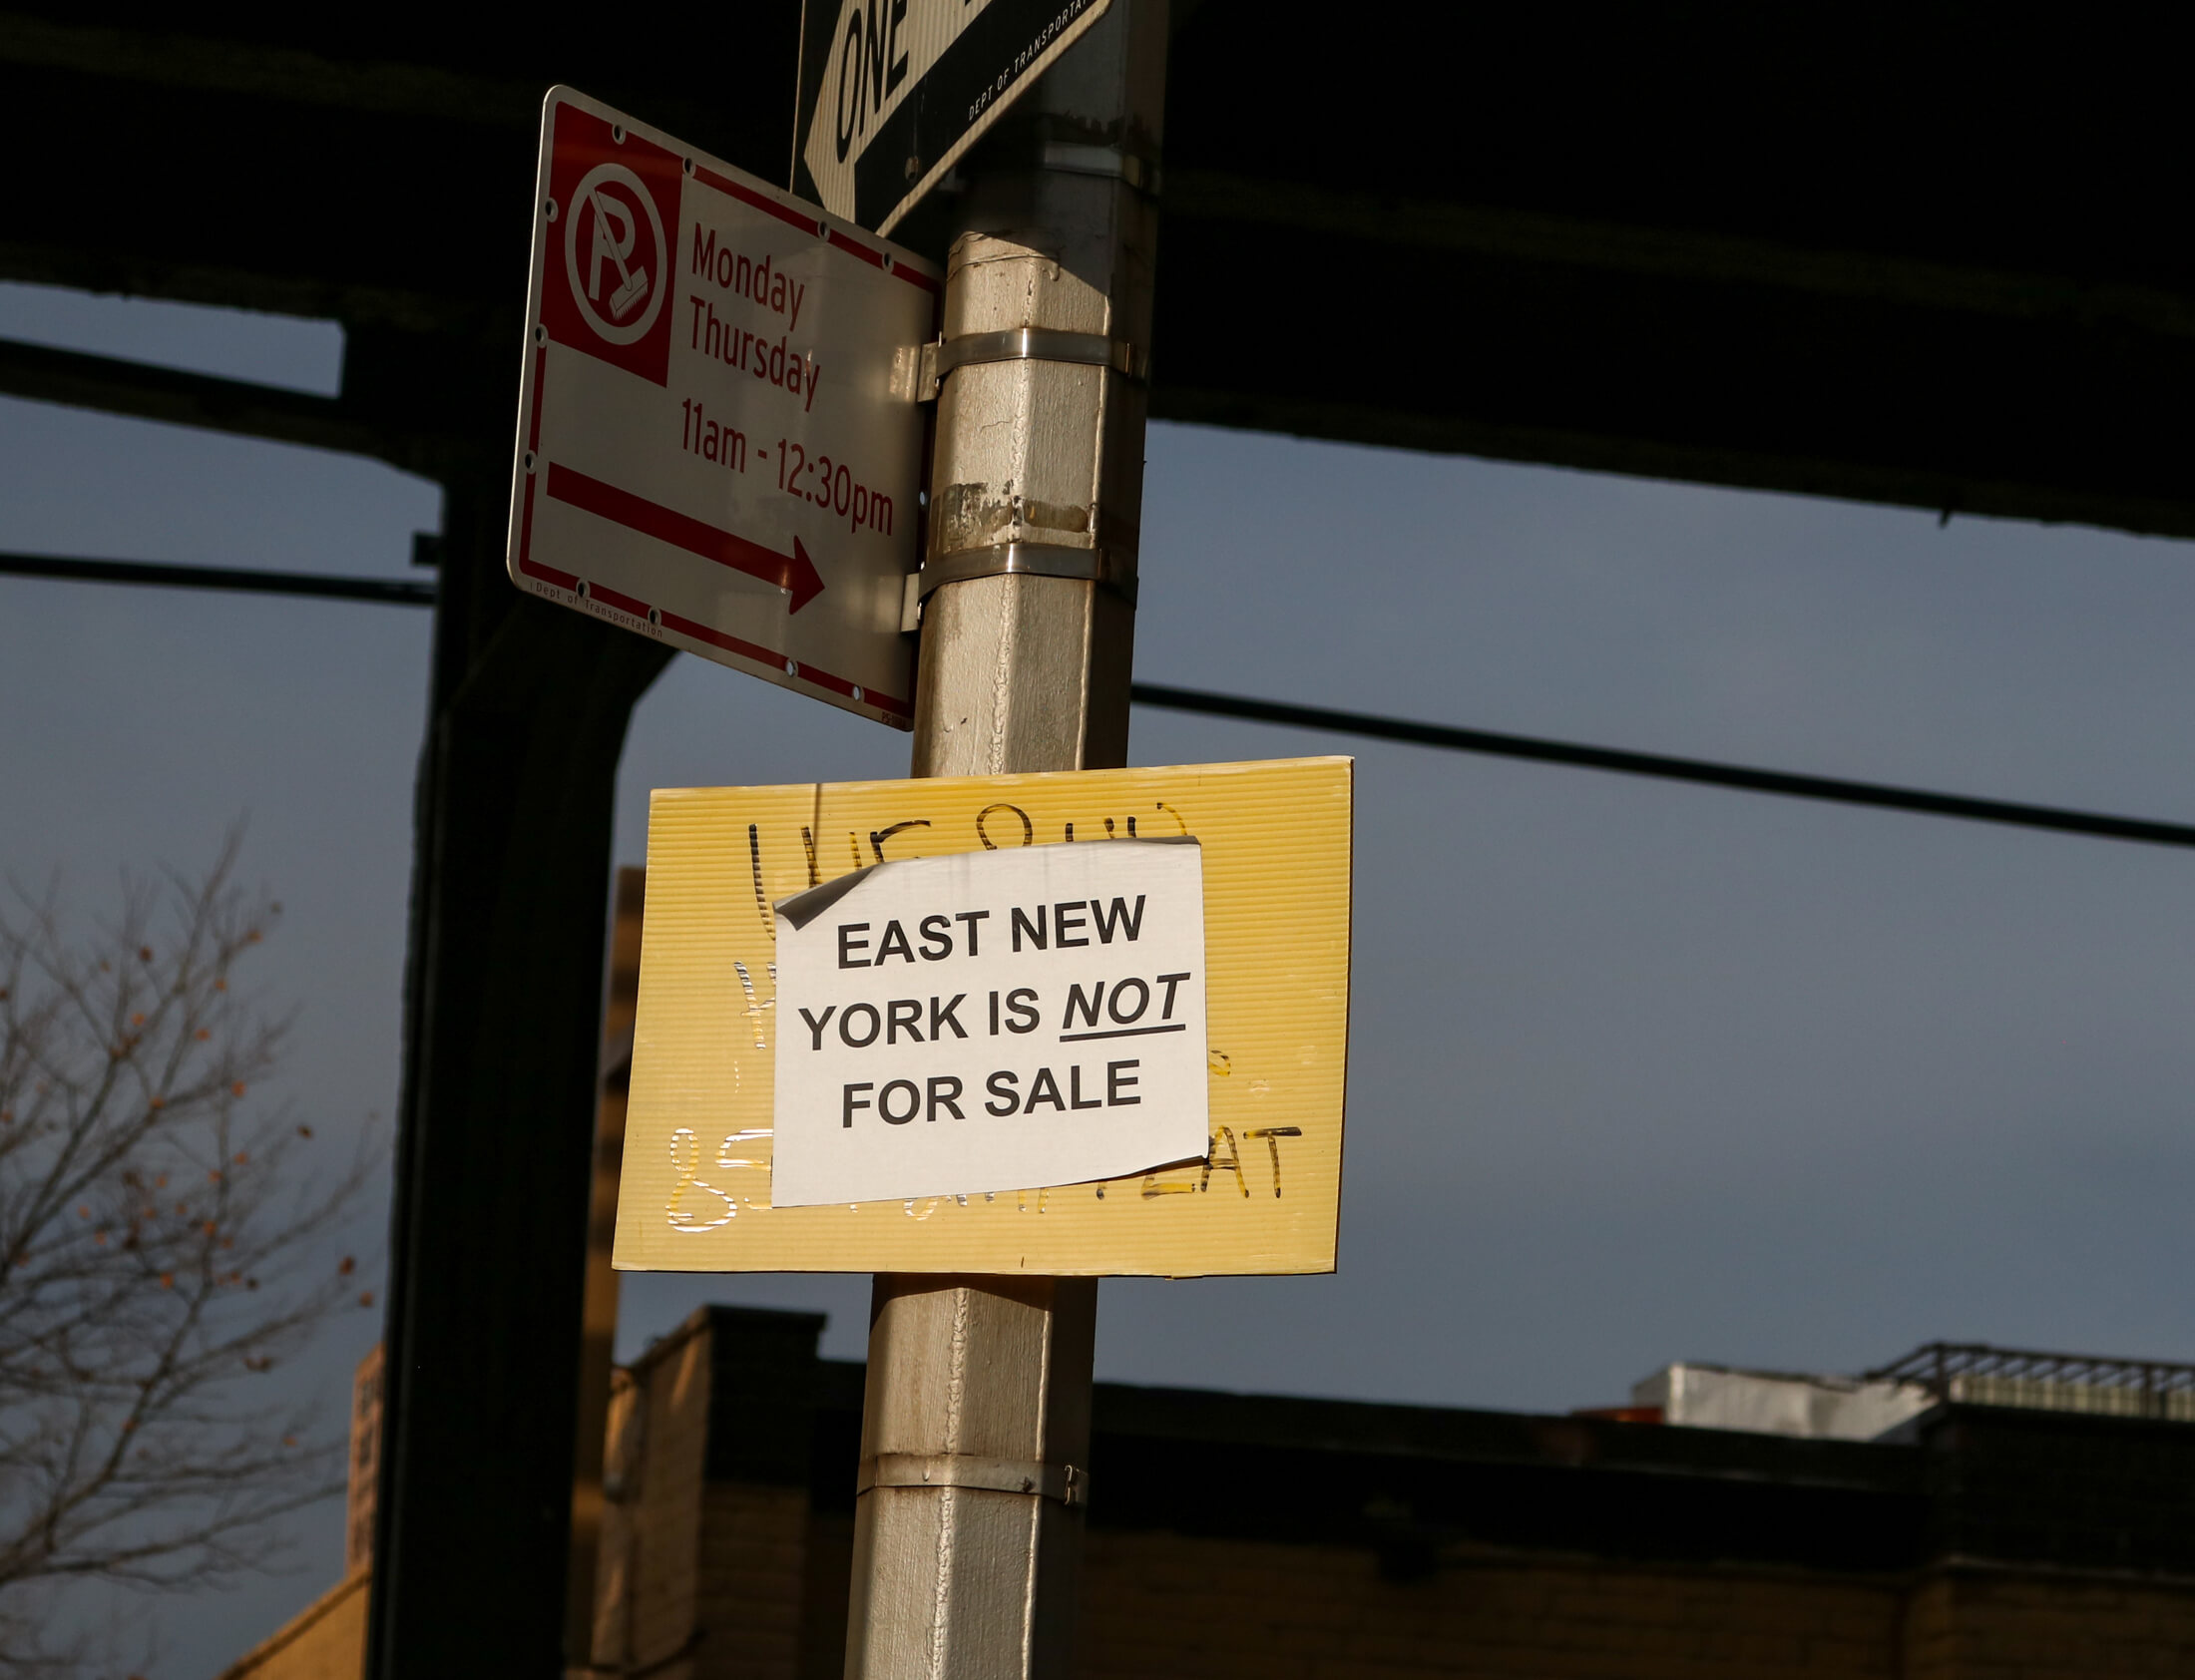 east new york is not for sale sign on lightpole